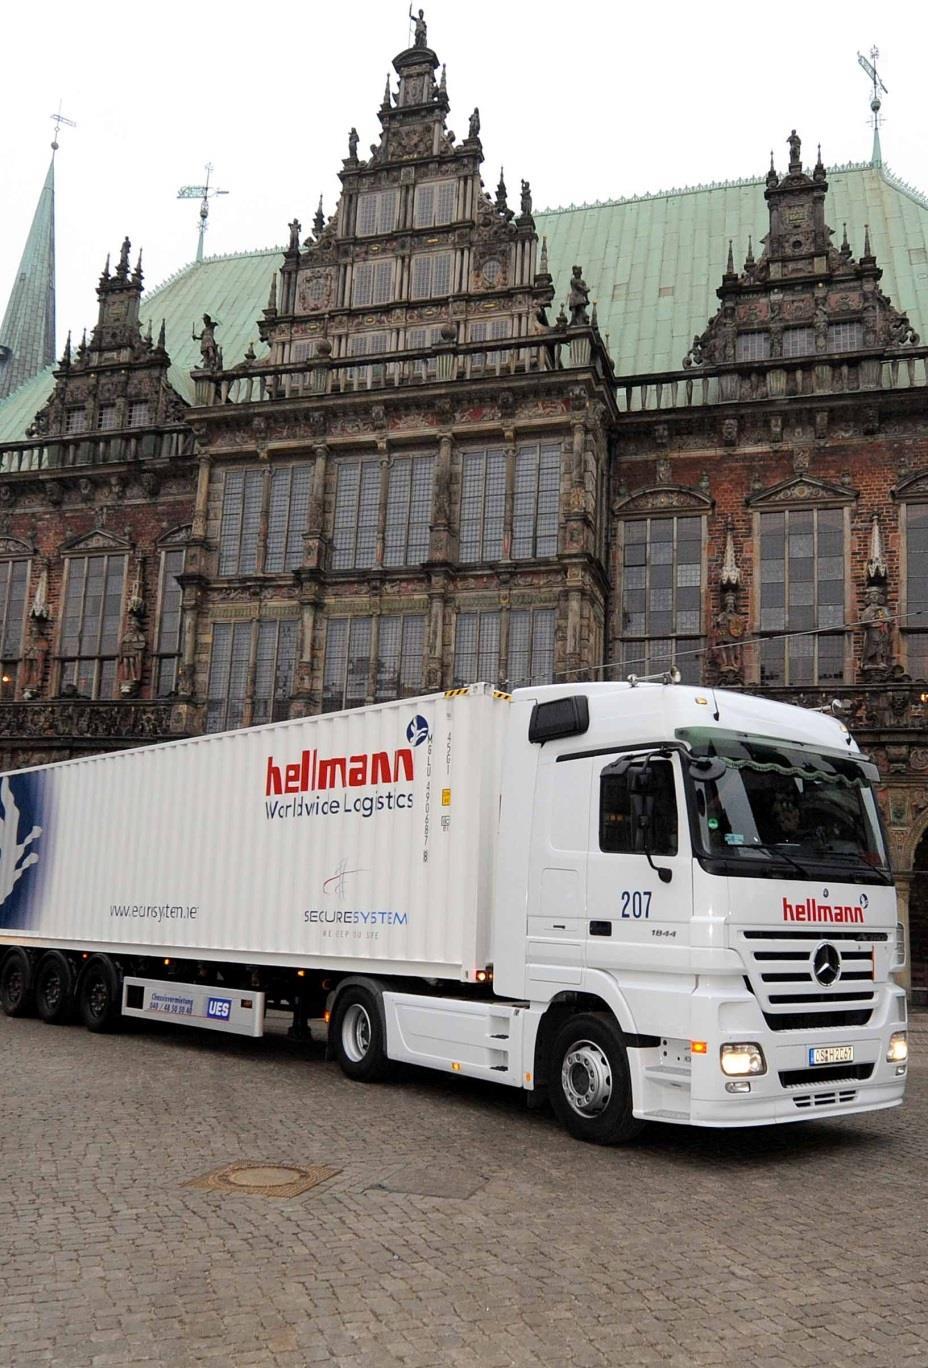 Exhibition Forwarding Hellmann Beverage Logistics, prides itself in handling the Global Logistics requirements for the International Wine Challenge, International Wine and Spirit Competition and the